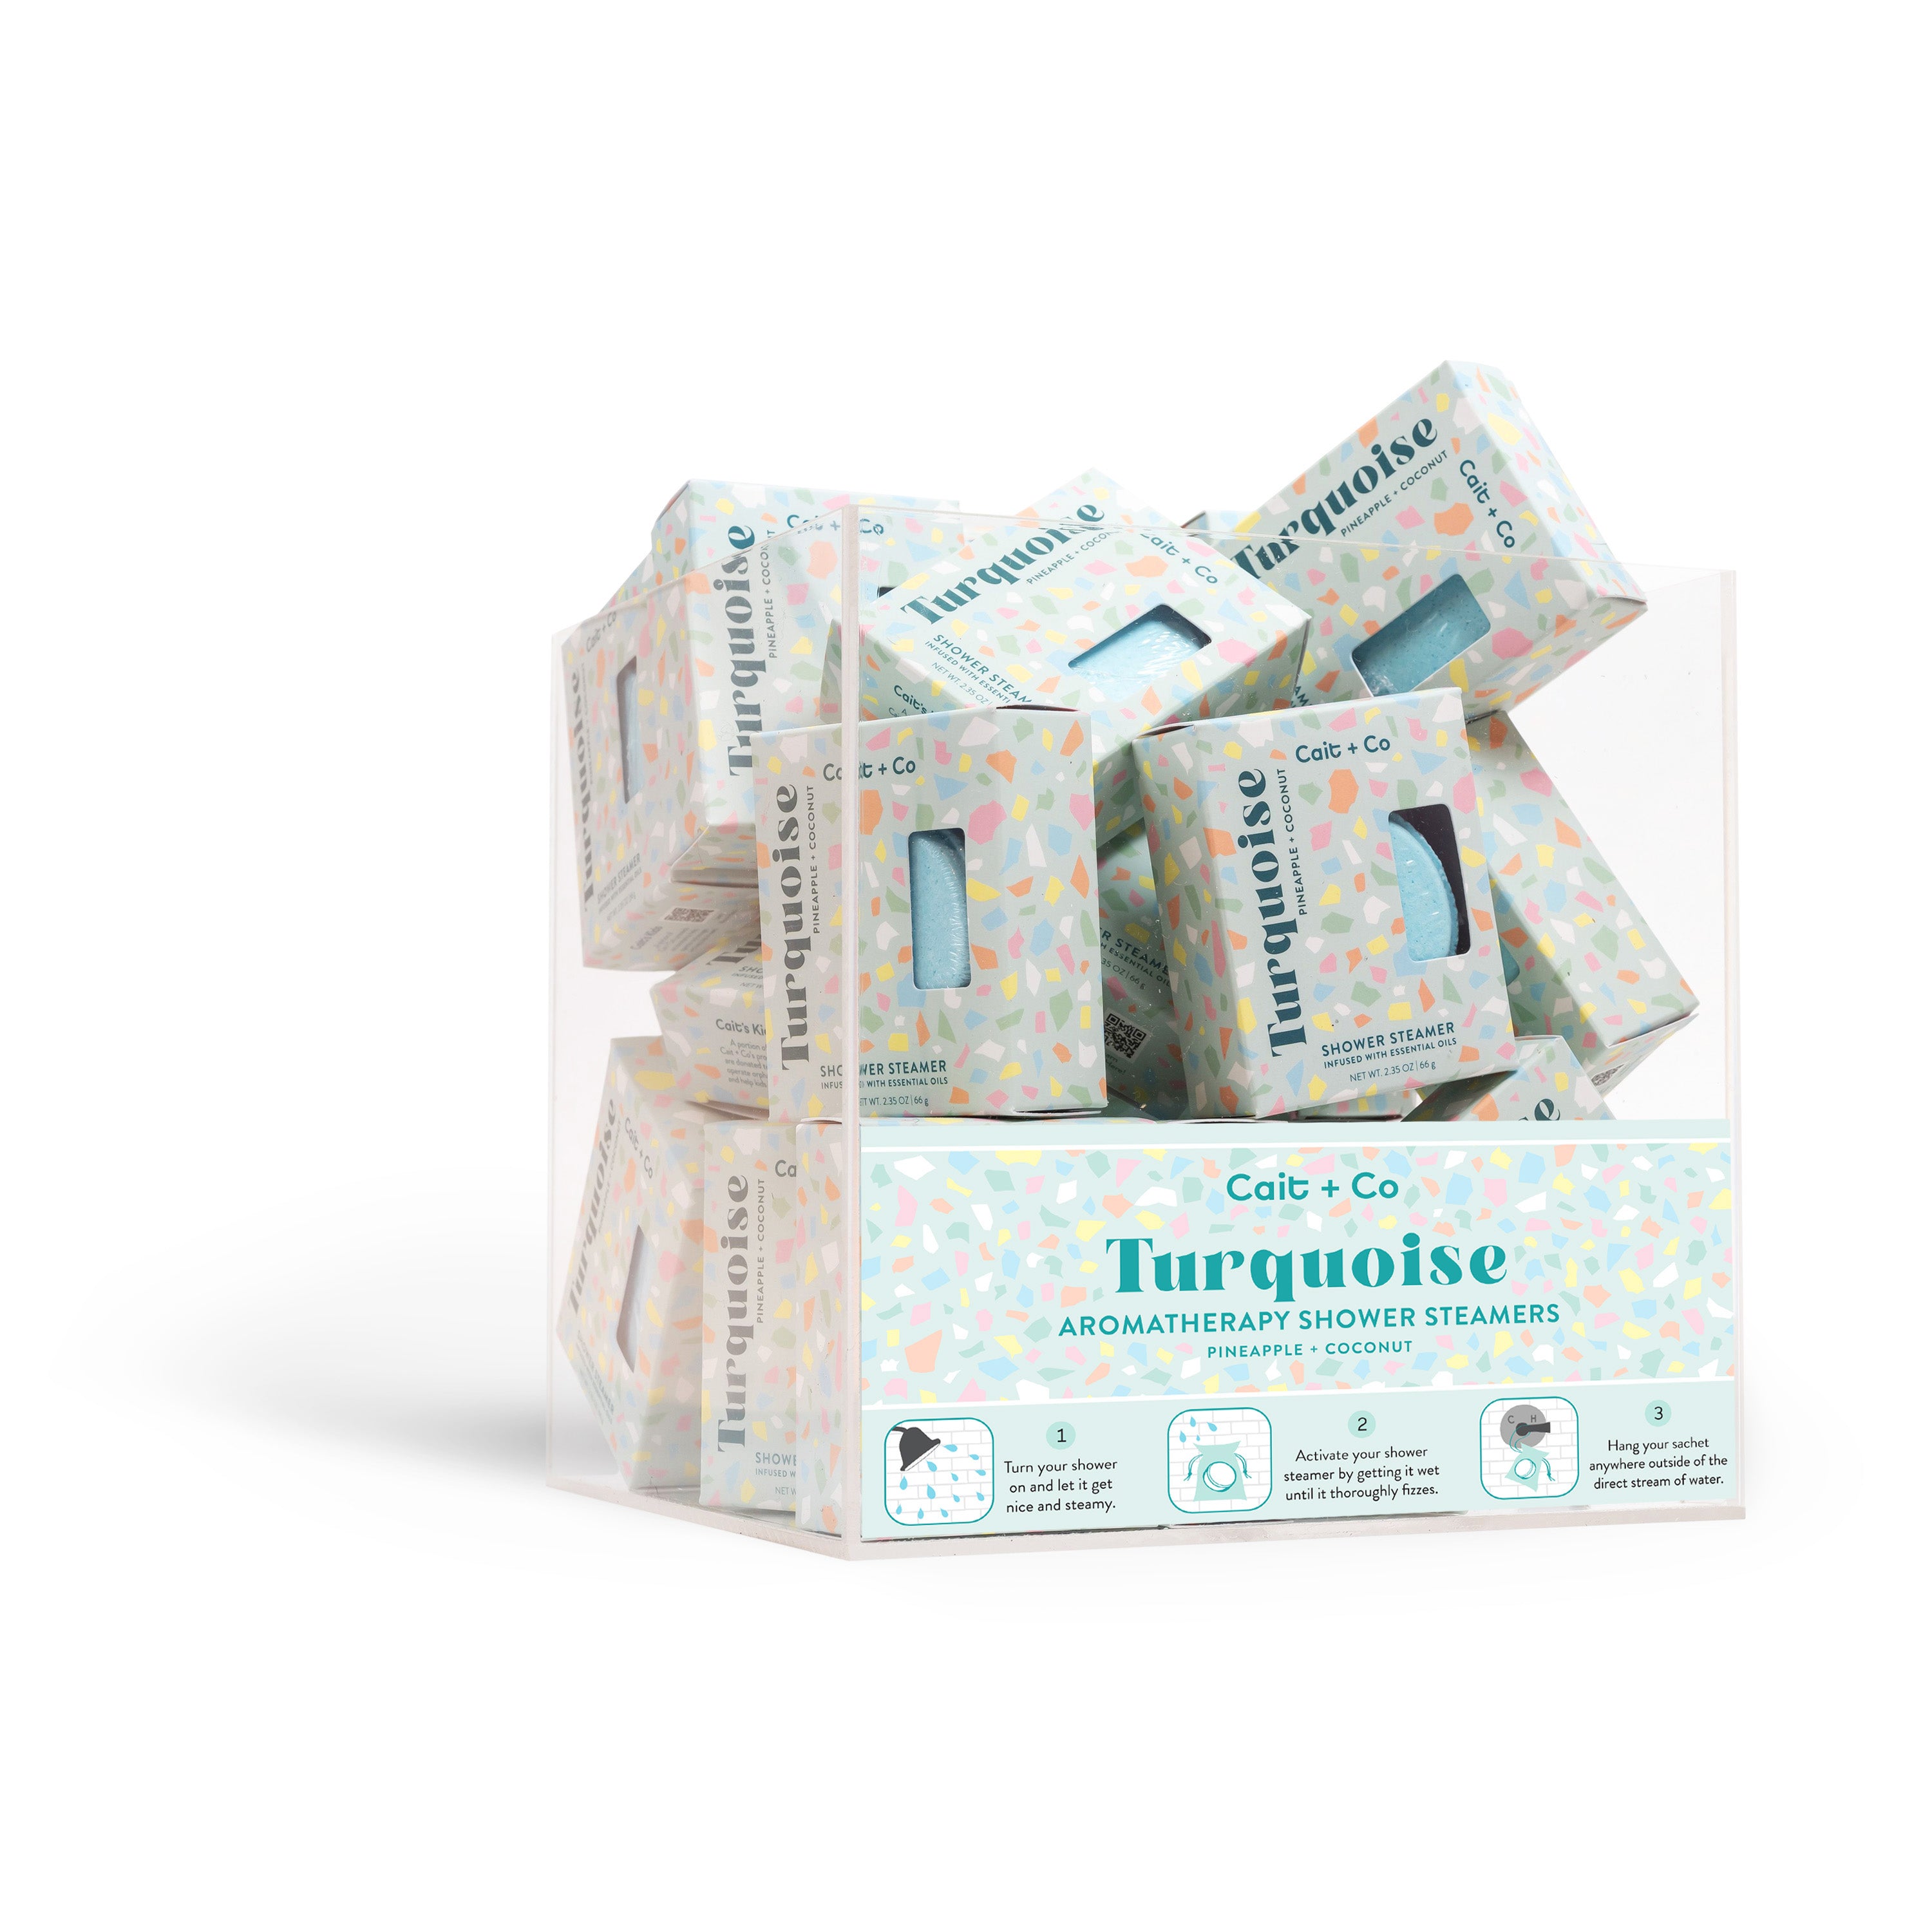 Turquoise - Aromatherapy Shower Steamer Cube Display